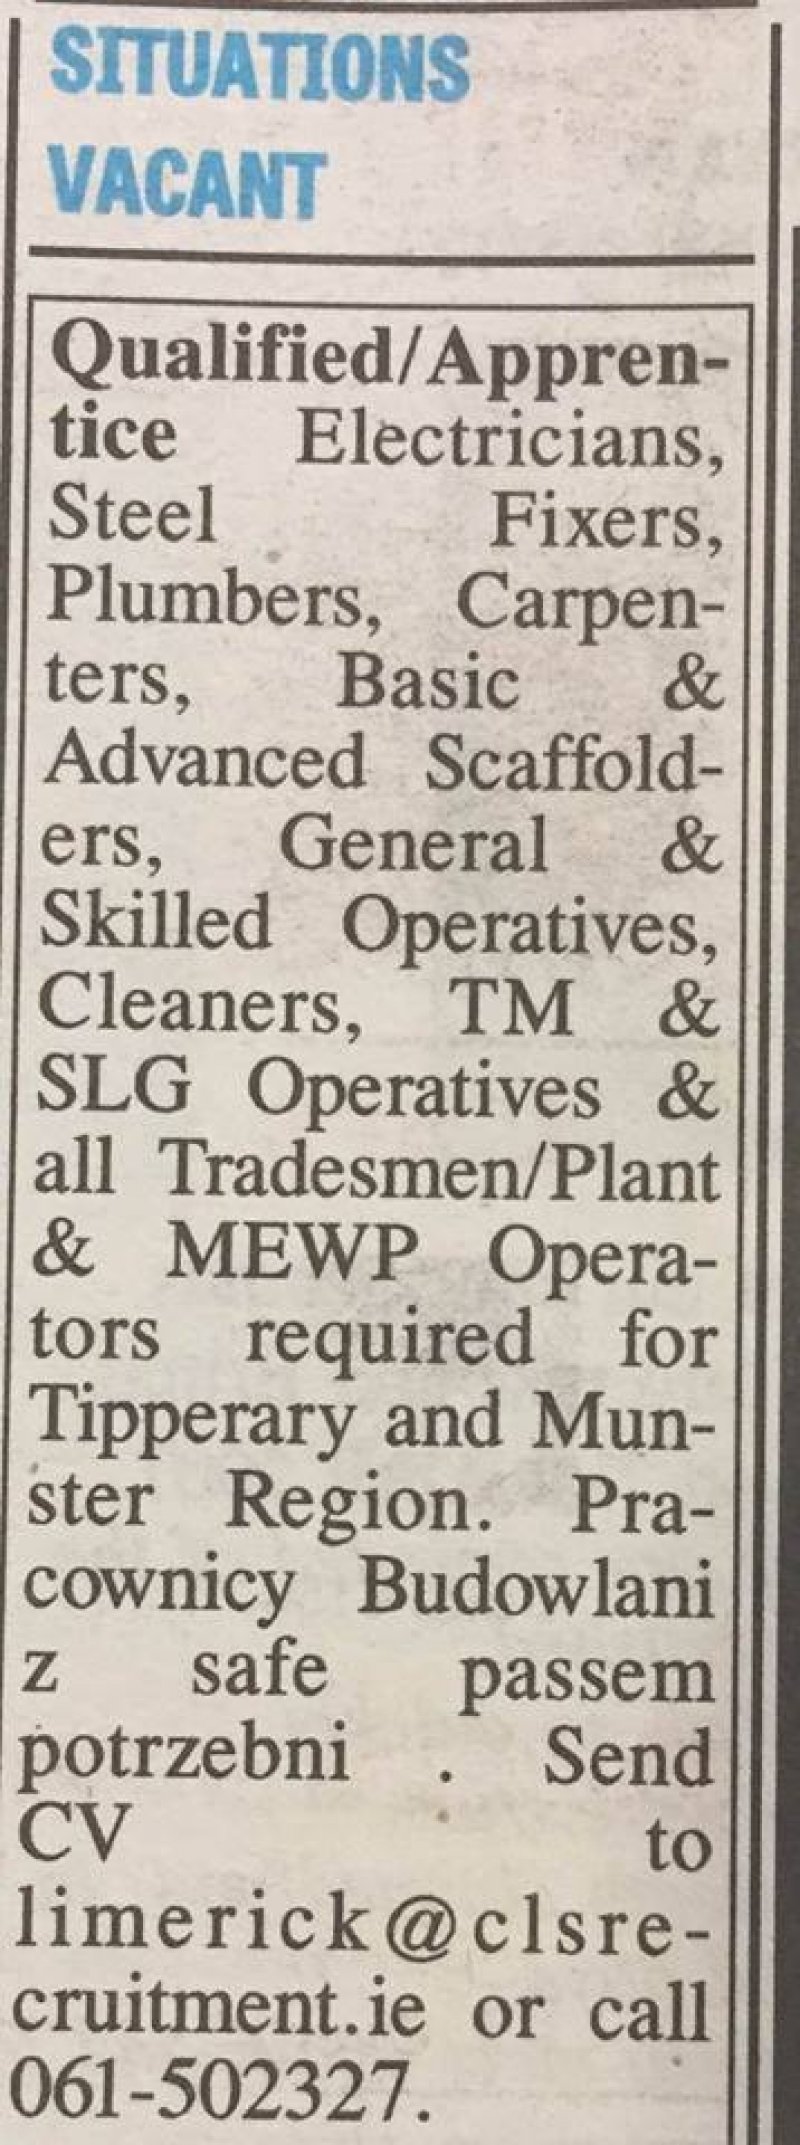 Tipperary Star - Situations Vacant2